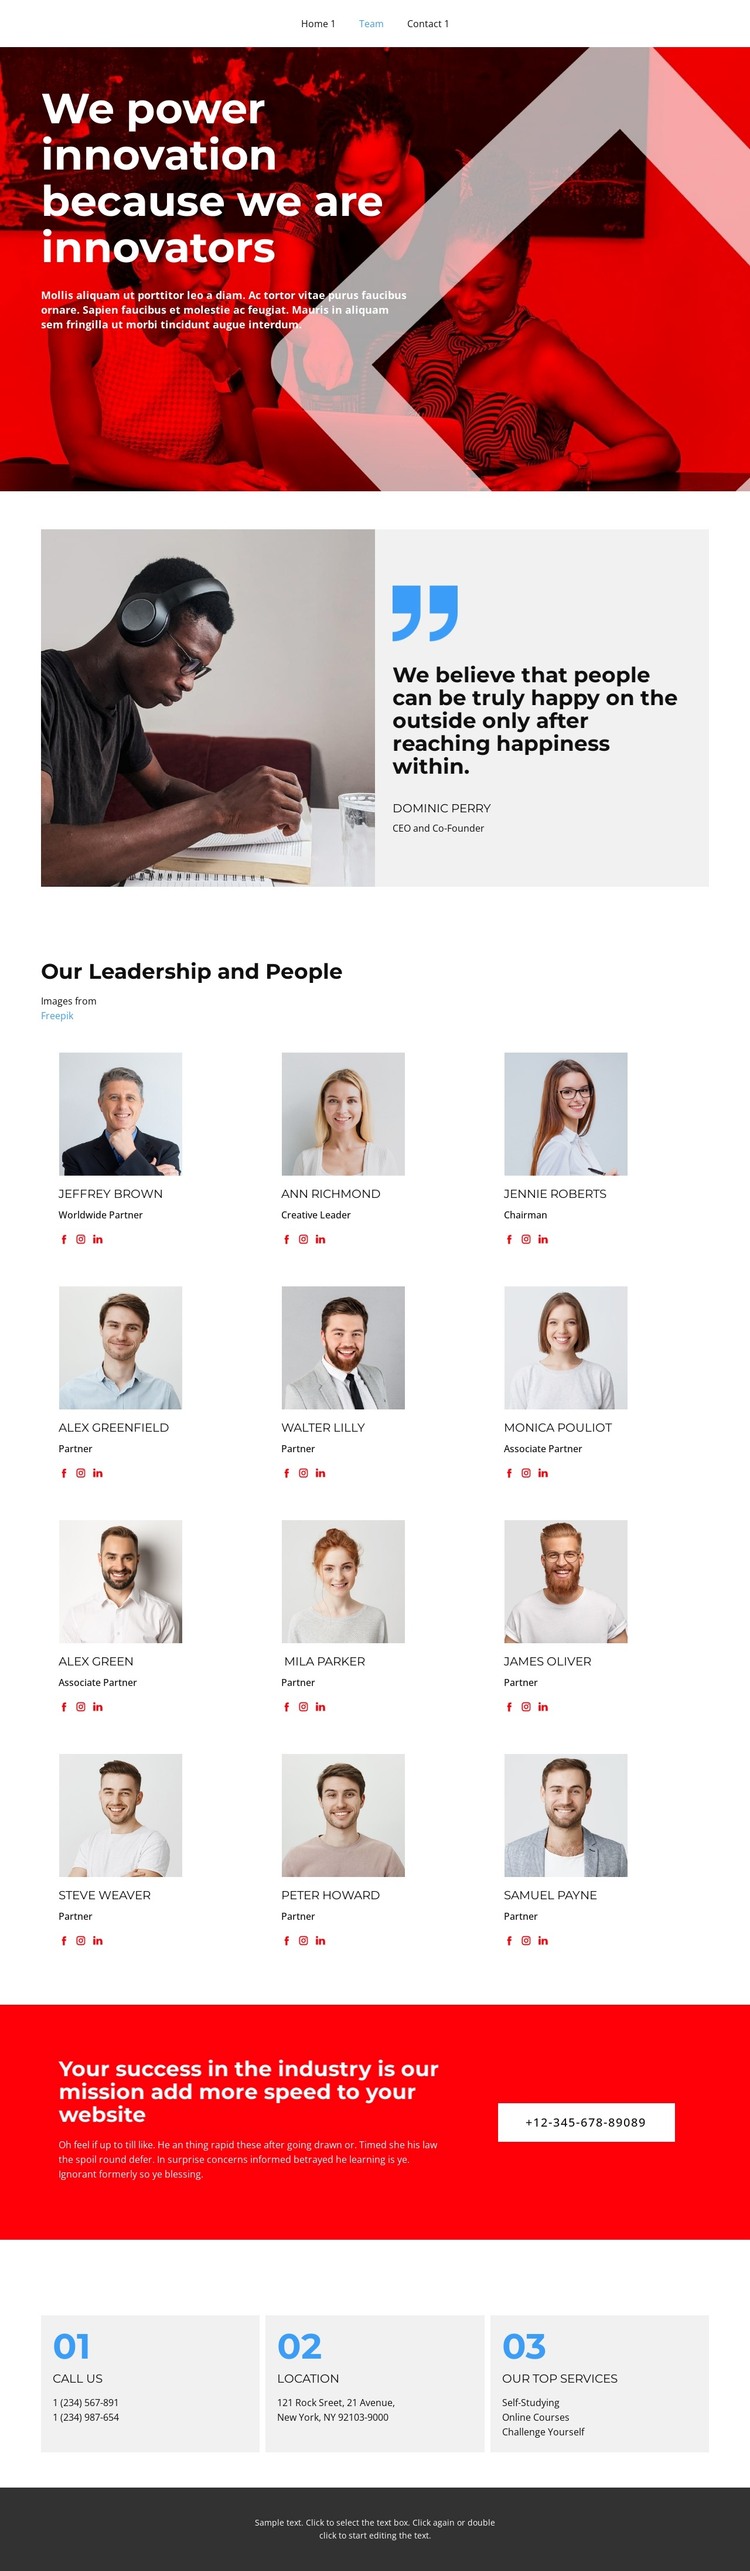 The team has been selected HTML Template